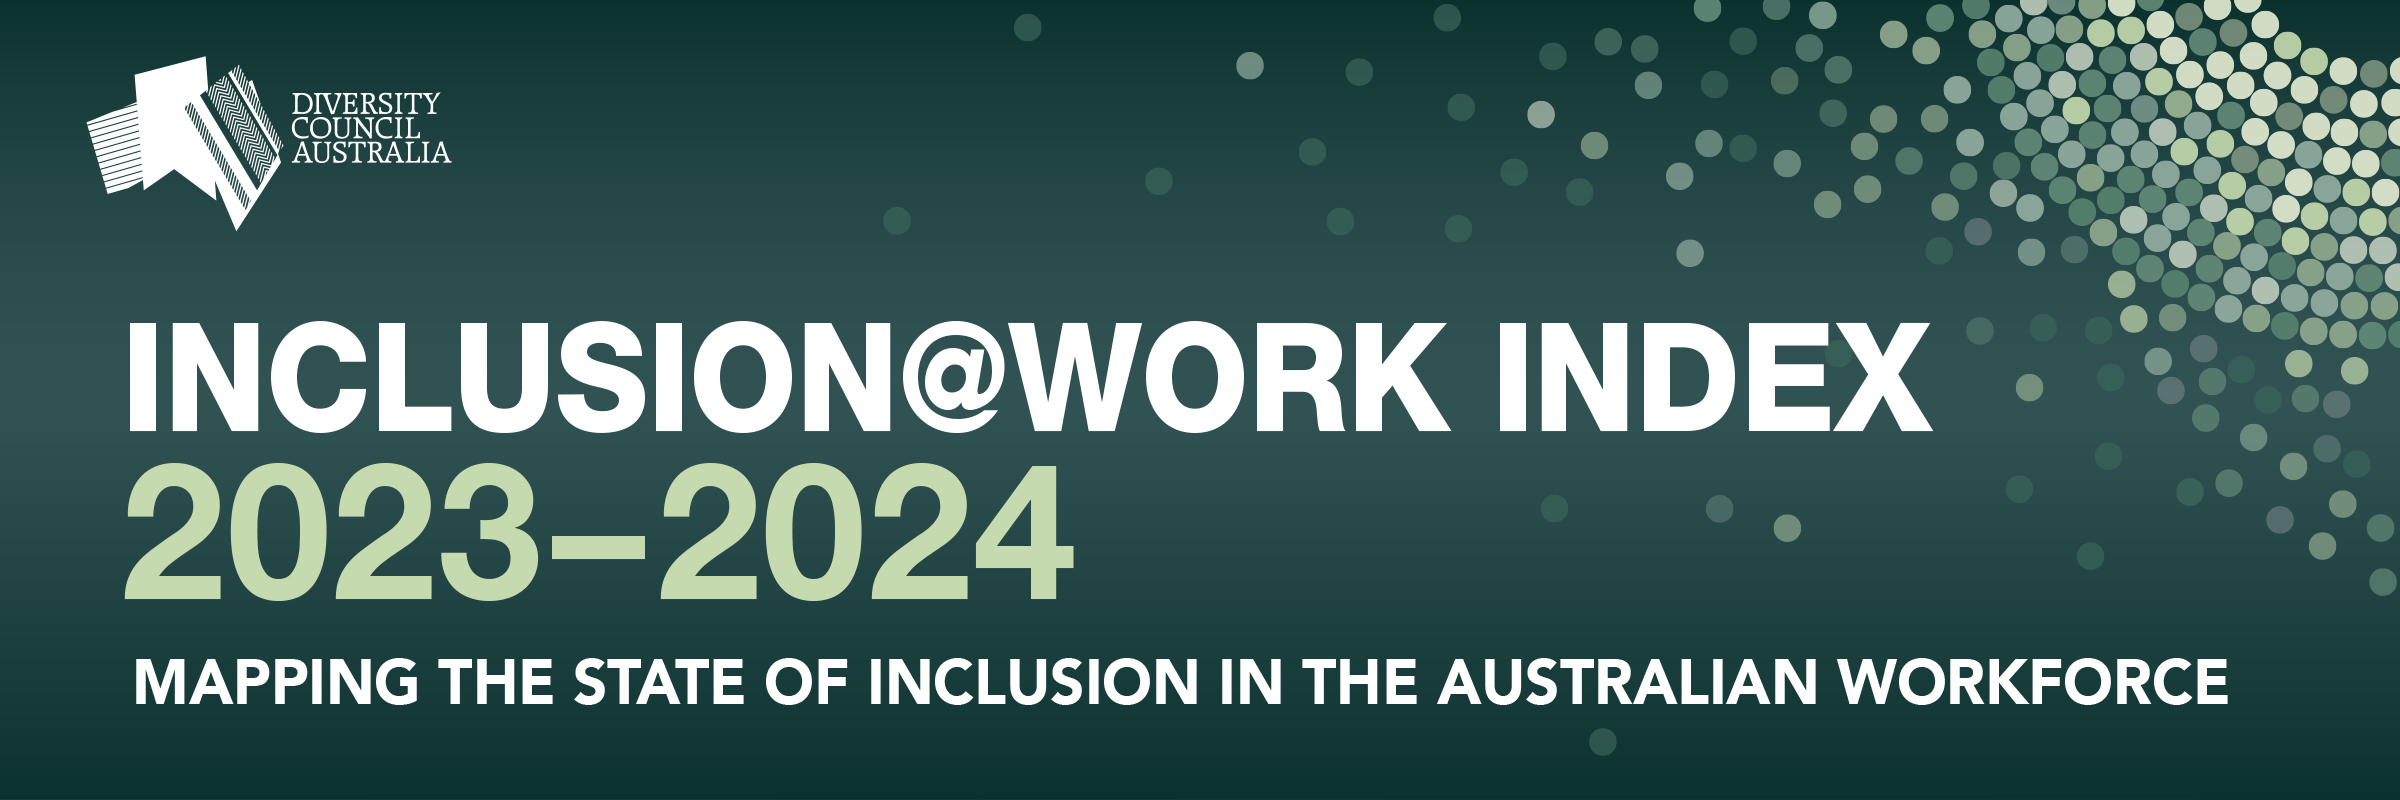 Banner for research launch, includes DCA logo and the text: Inclusion@Work Index 2023-2024: Mapping the state of inclusion in the Australian workforce